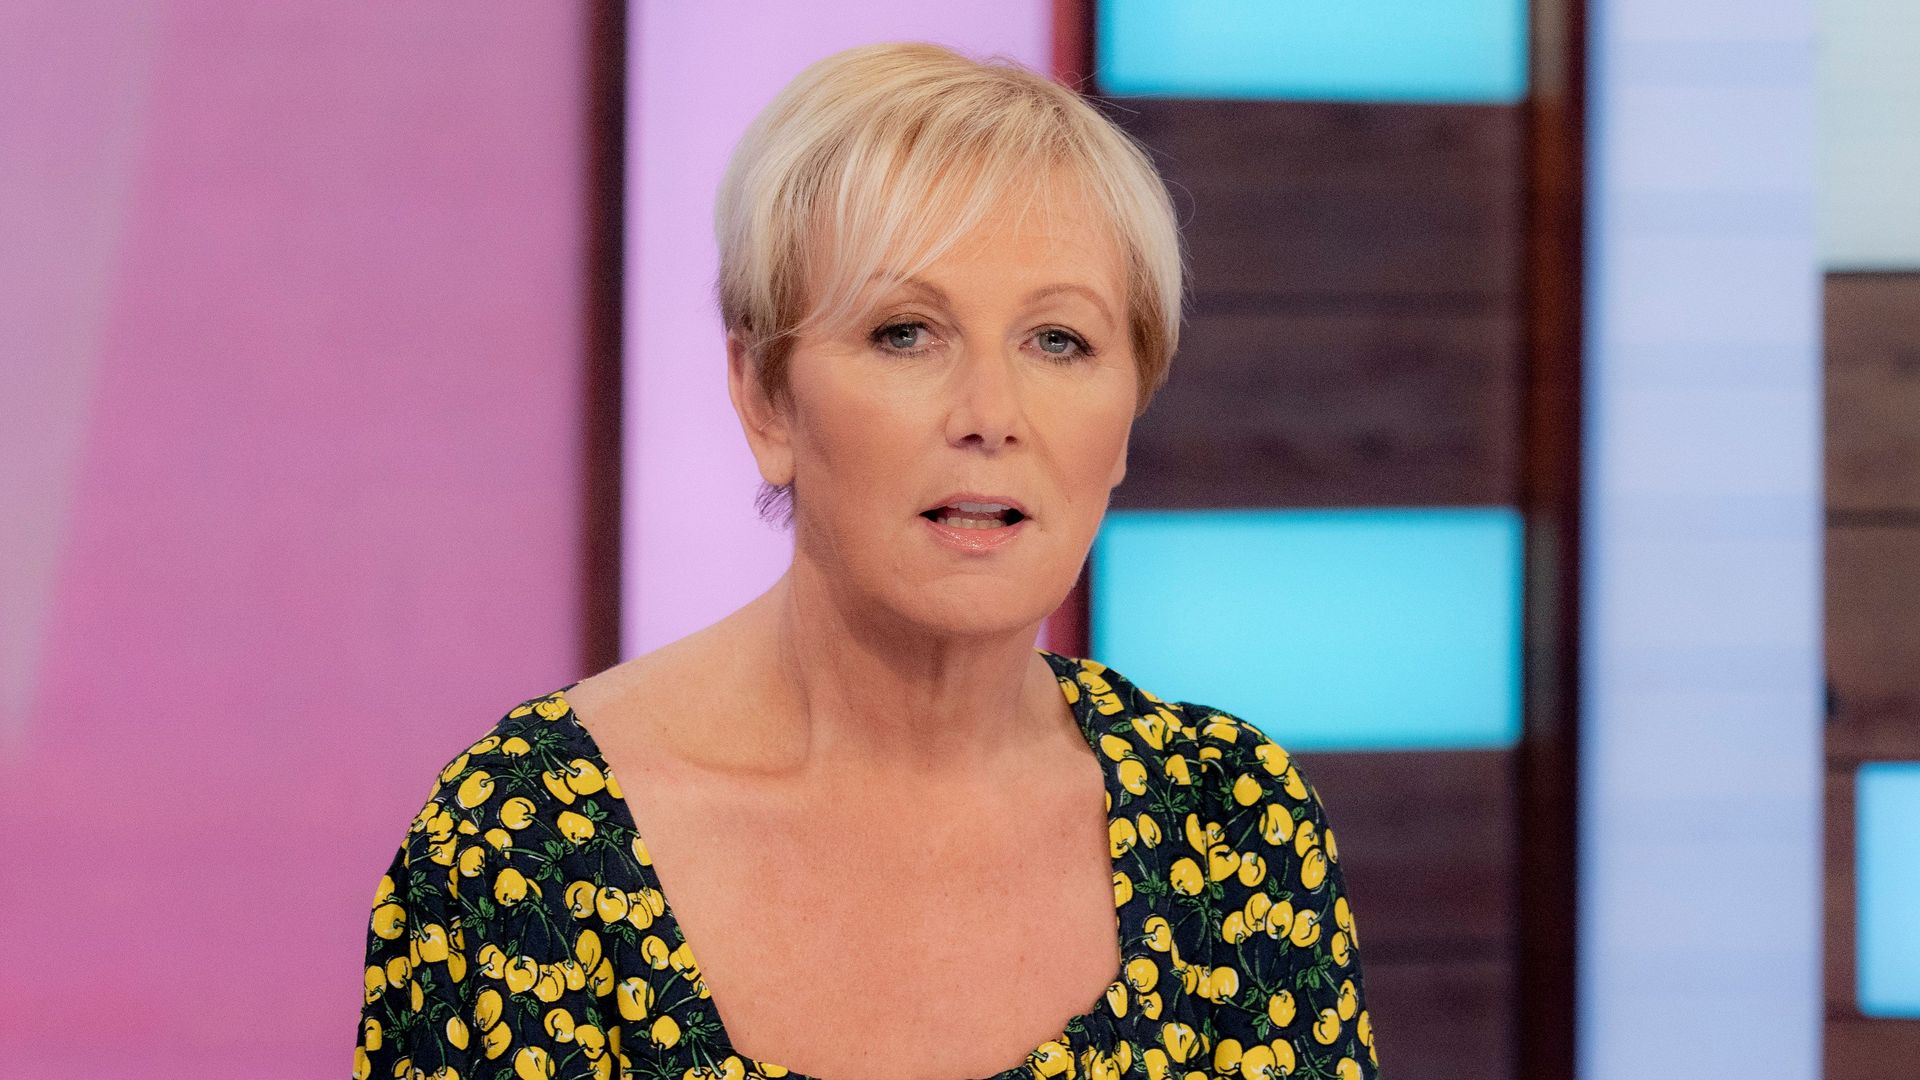 Sue Cleaver on Loose Women in a black and yellow top